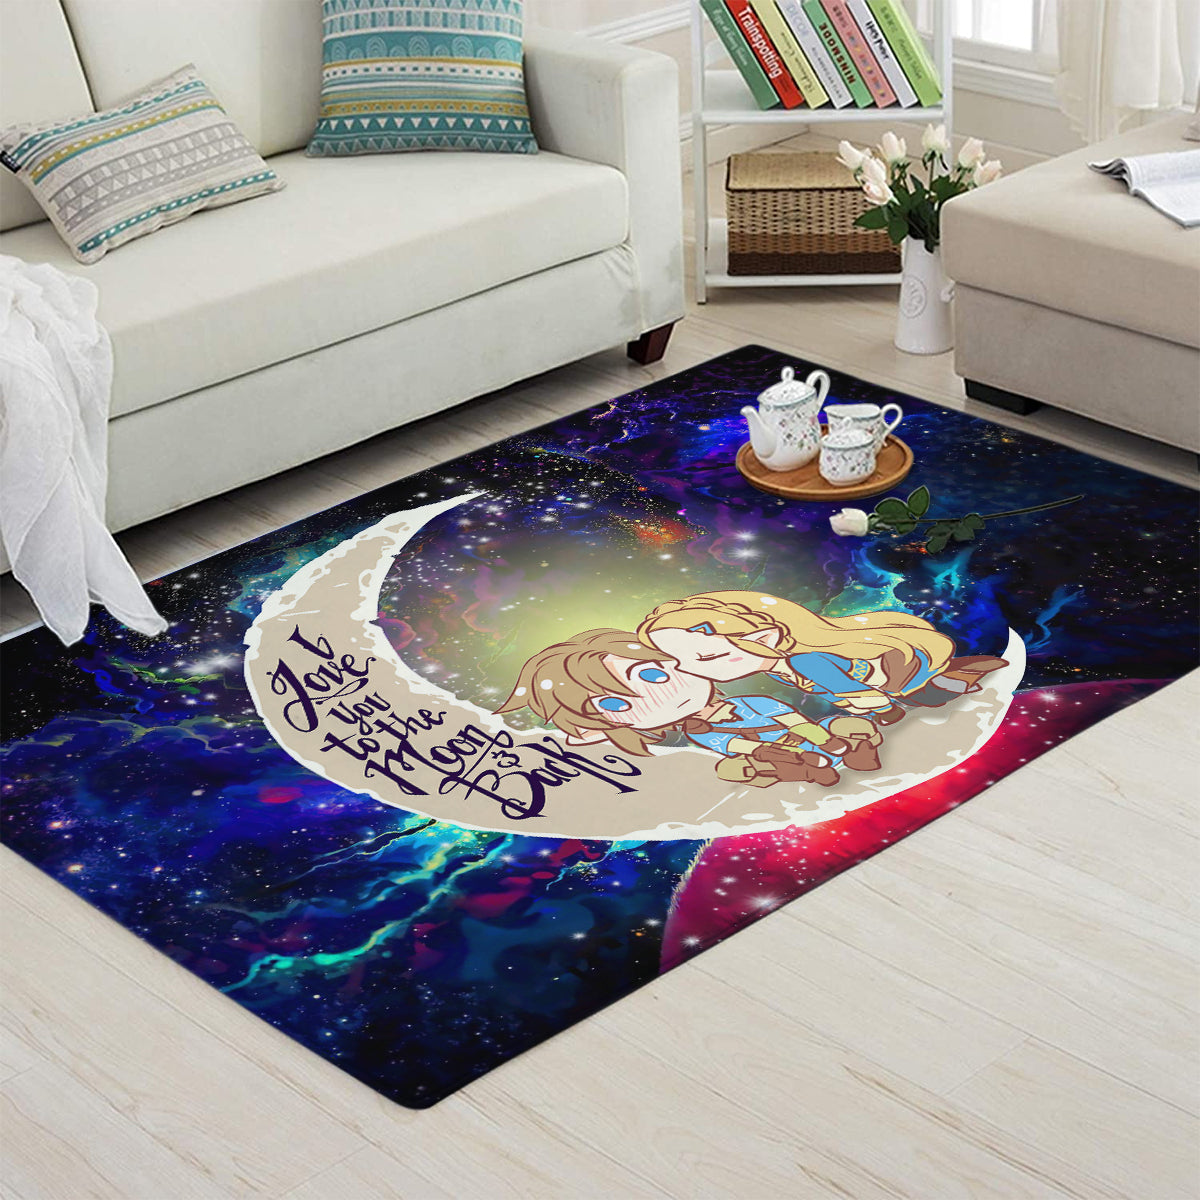 Legend Of Zelda Couple Chibi Couple Love You To The Moon Galaxy Carpet Rug Home Room Decor